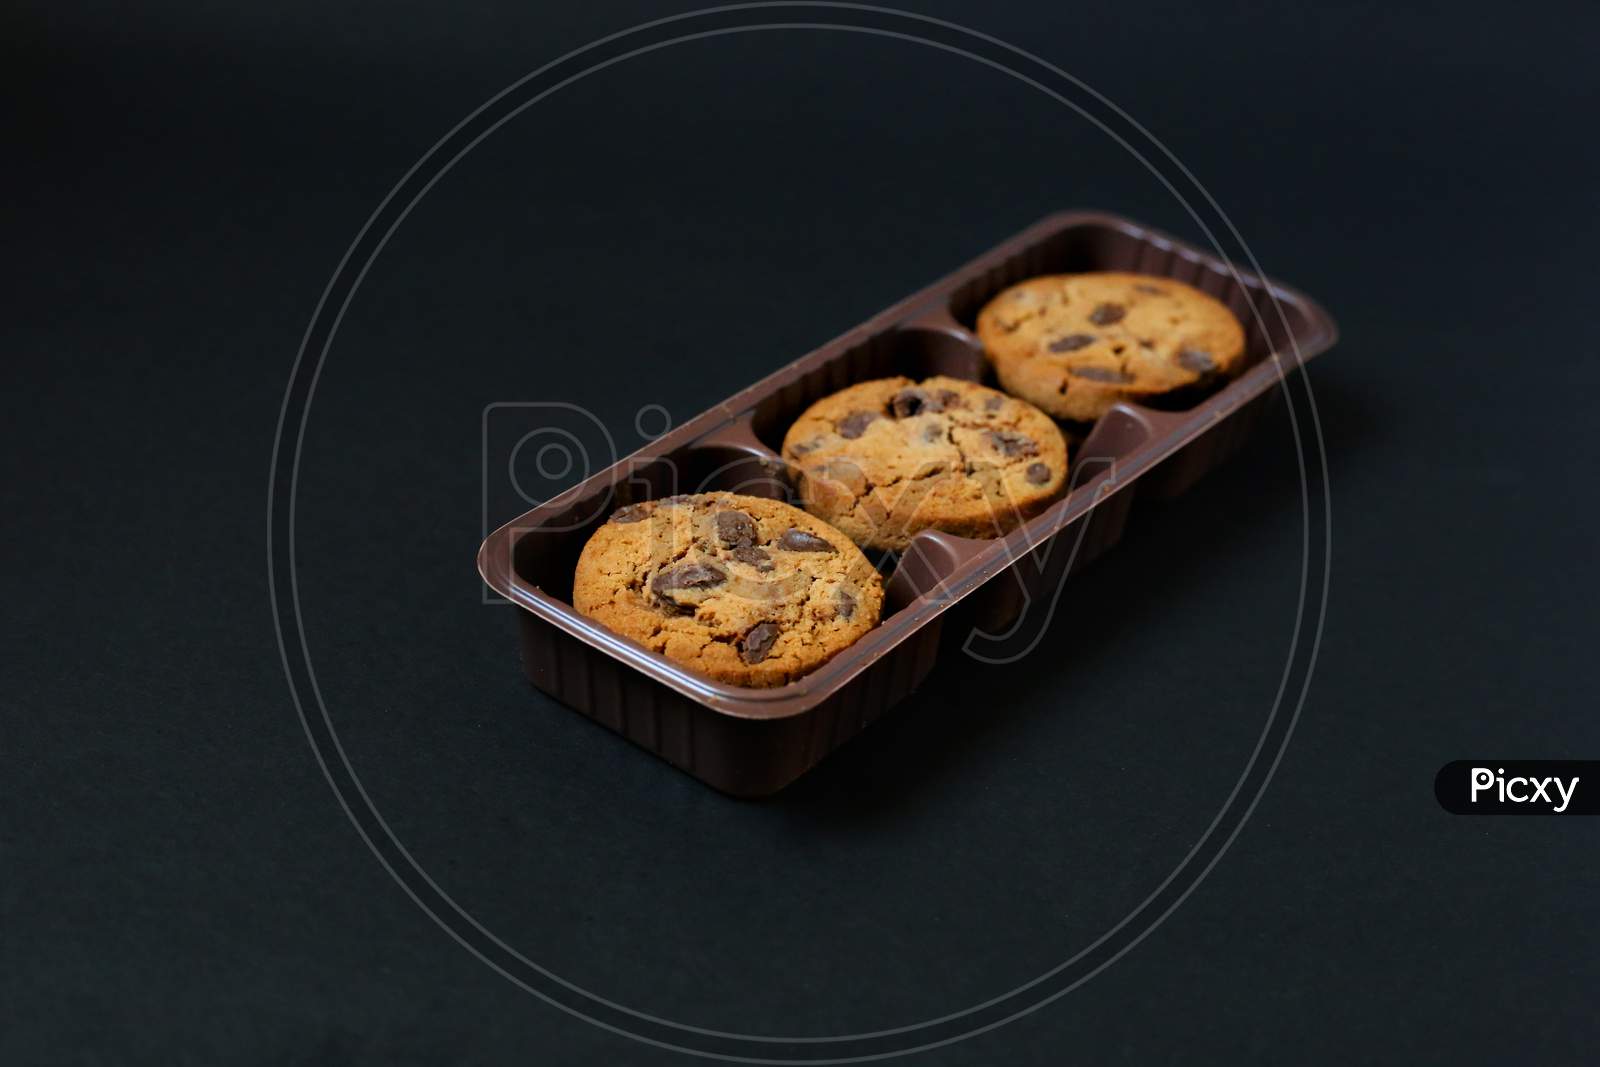 Chocolate Chip Cookies Isolated On Black Background. Chocolate cookies on black background. Chocolate chip cookie on black background with copy space for text, closeup.